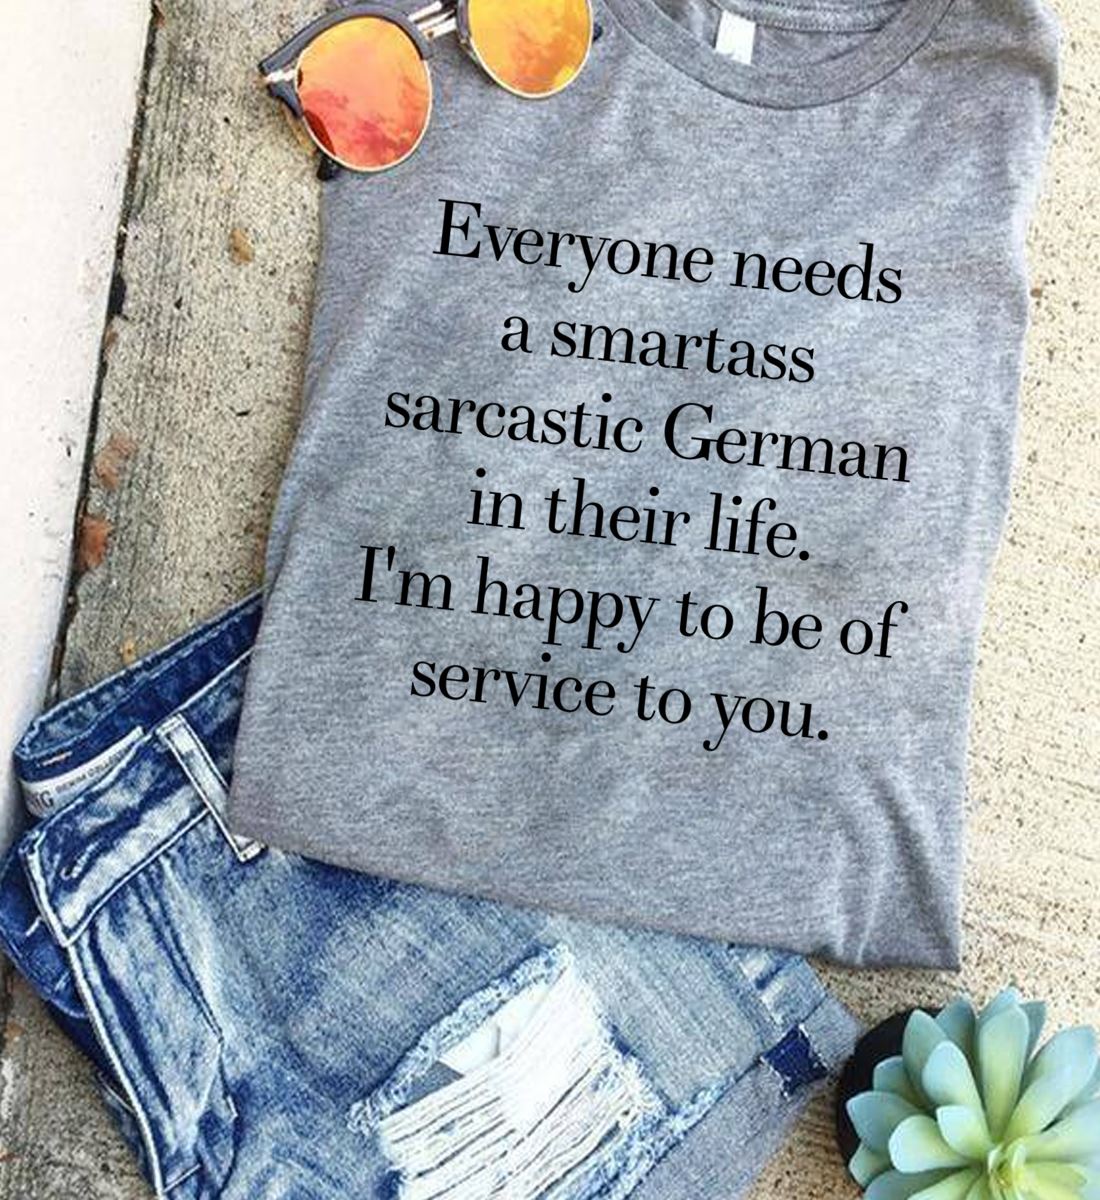 Everyone needs a smartass sarcastic German in their life, I'm happy to be of service to you